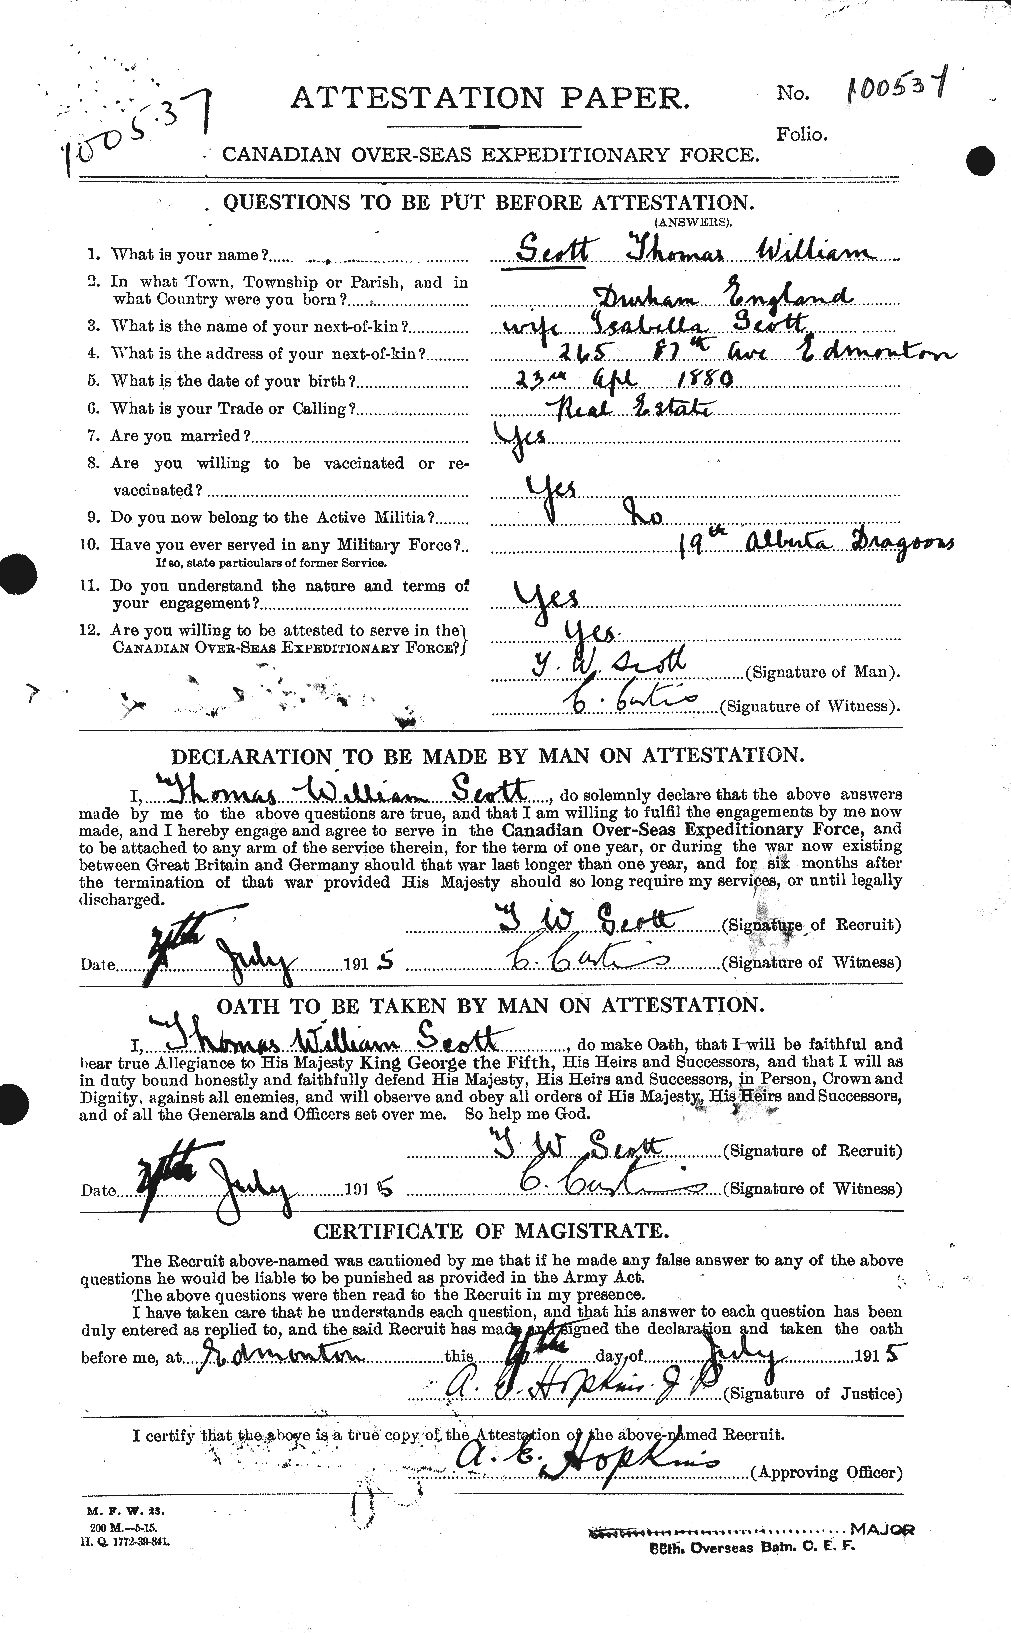 Personnel Records of the First World War - CEF 088215a